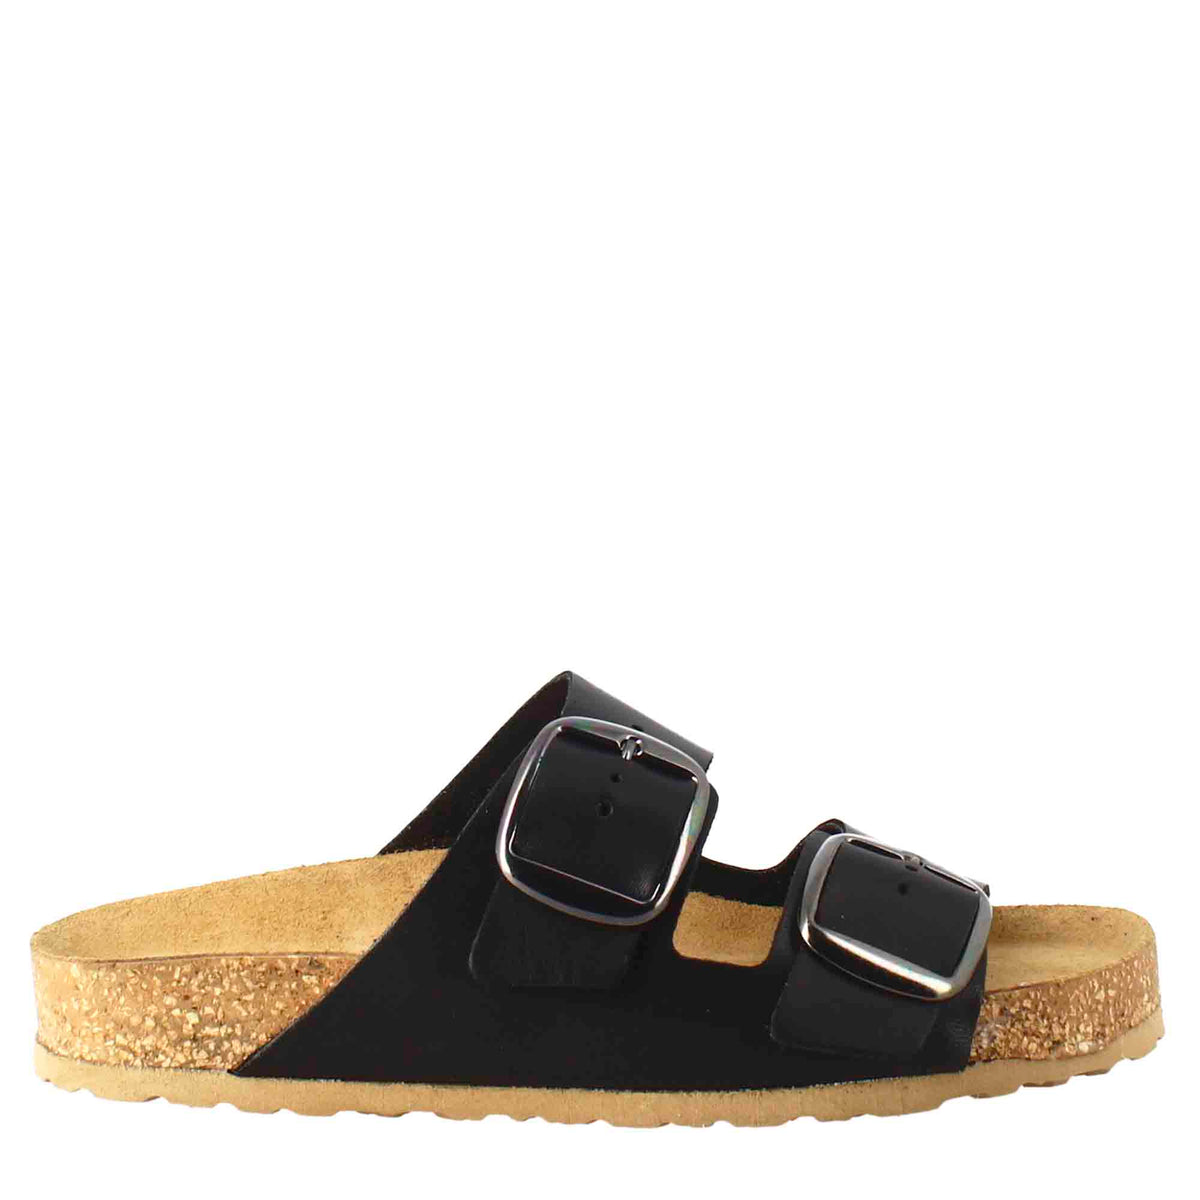 Women's double buckle sandals in black leather